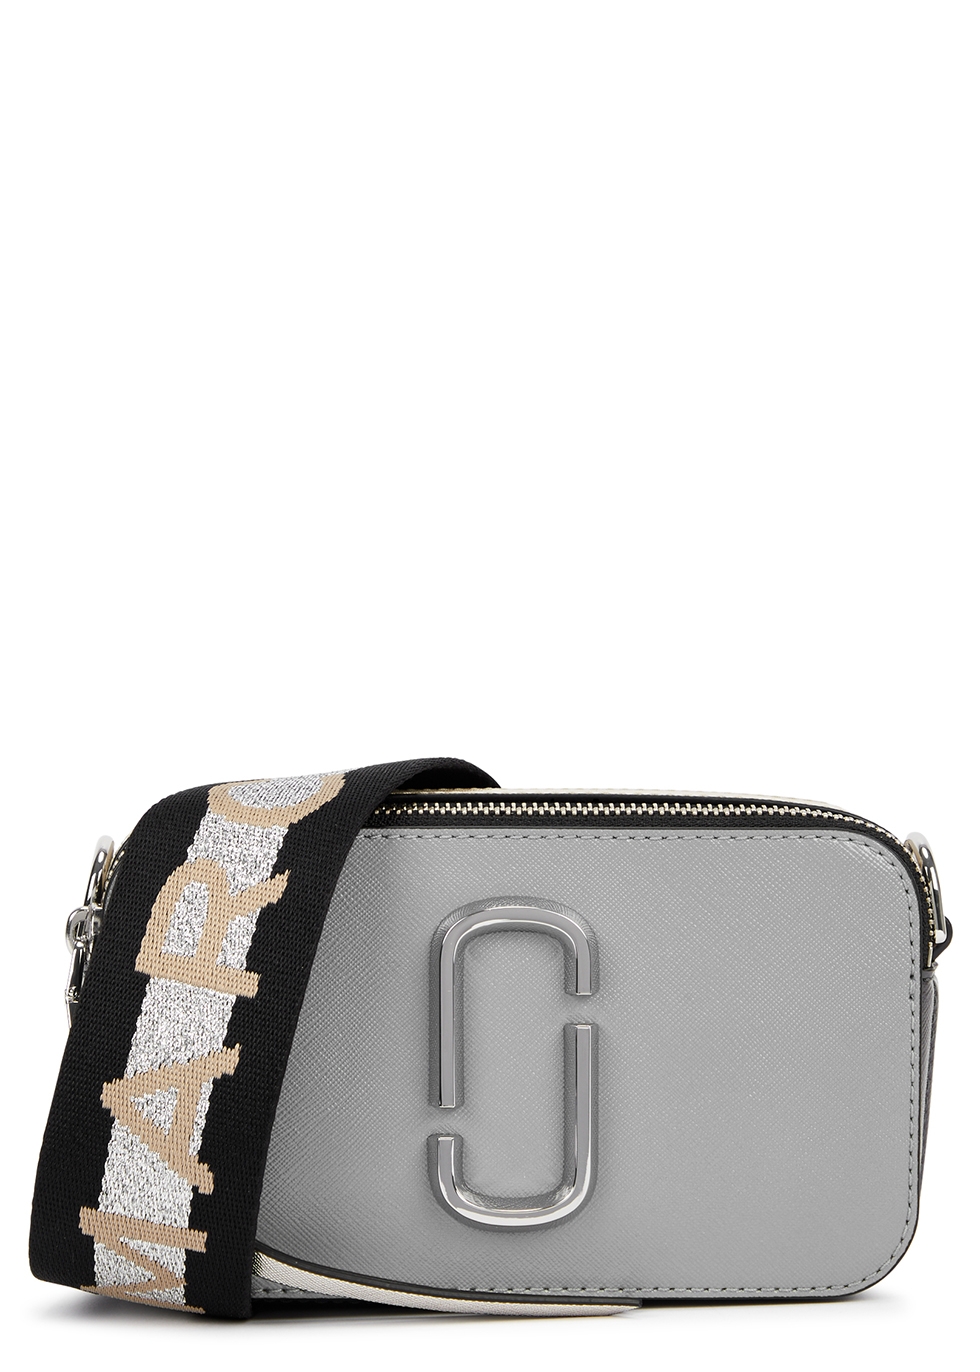 The Snapshot panelled leather cross-body bag